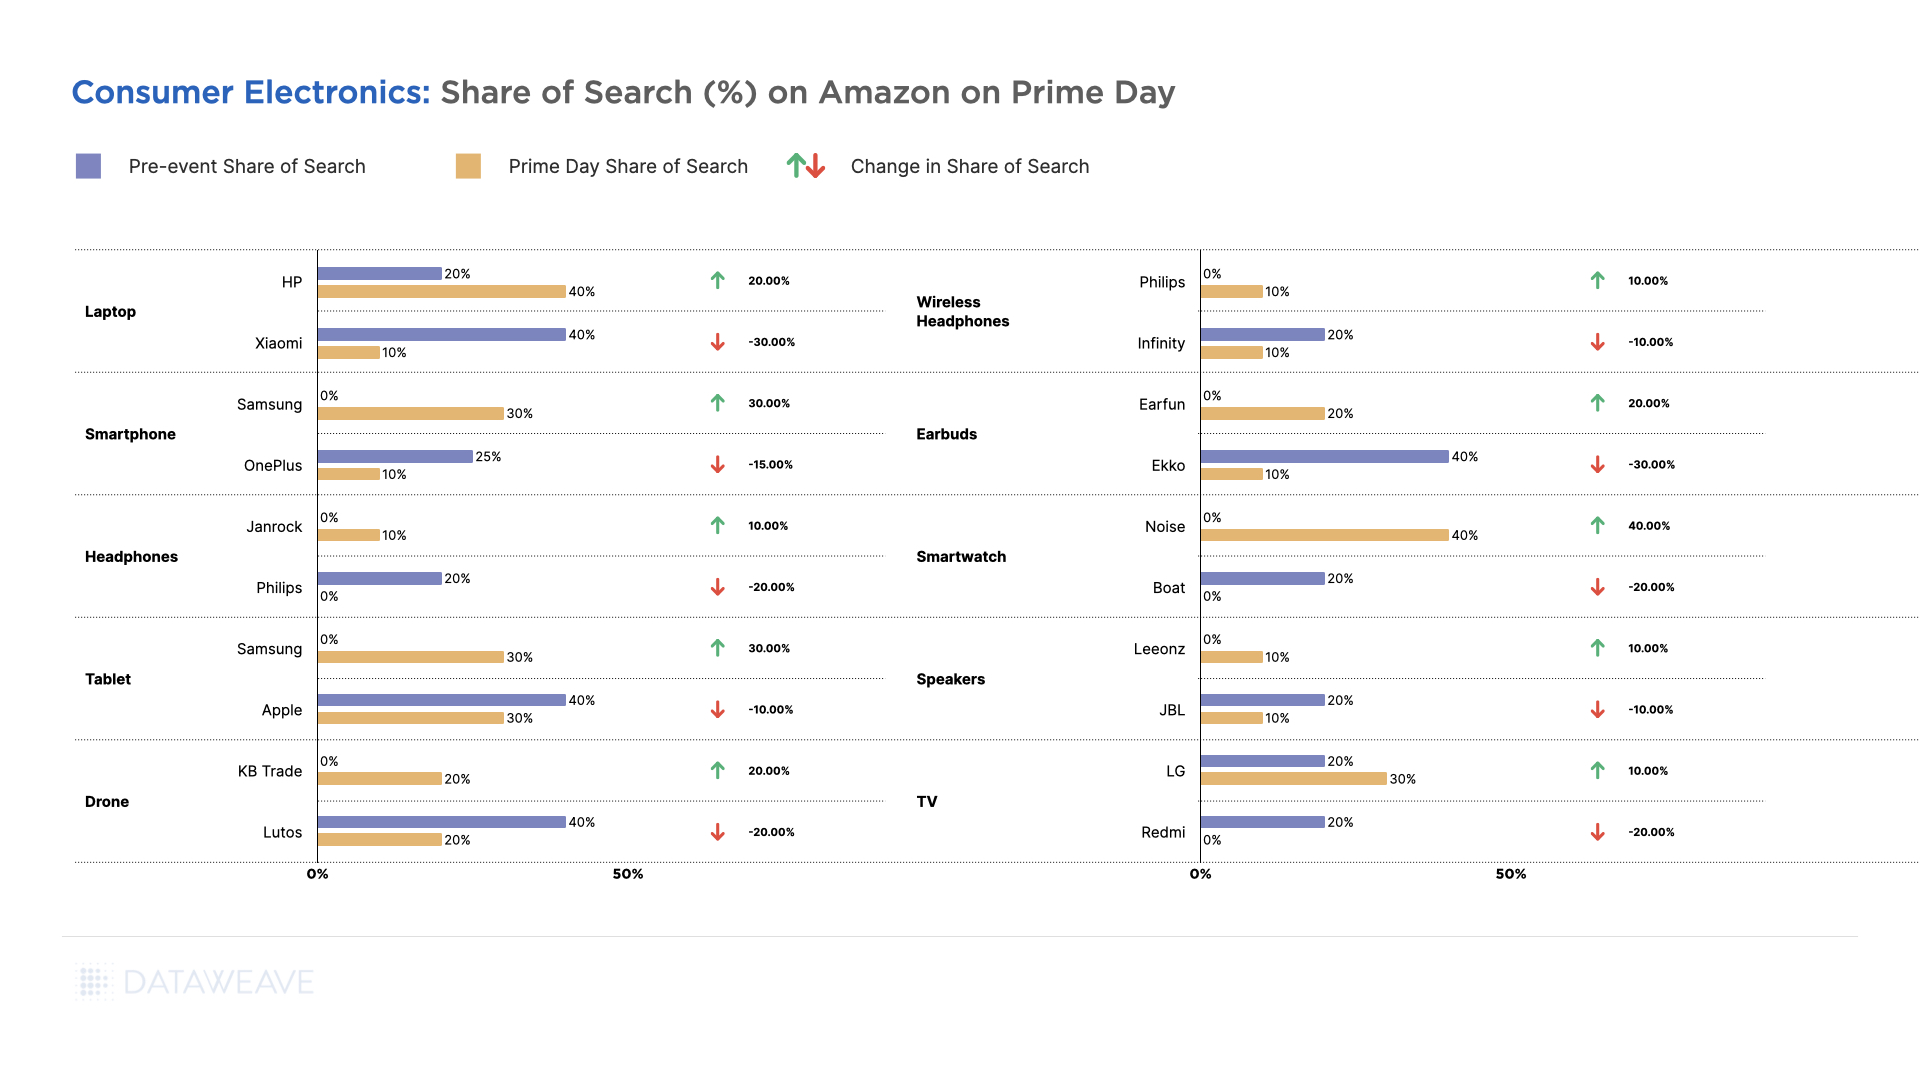 Consumer electronics share of search on Amazon on Prime Day.